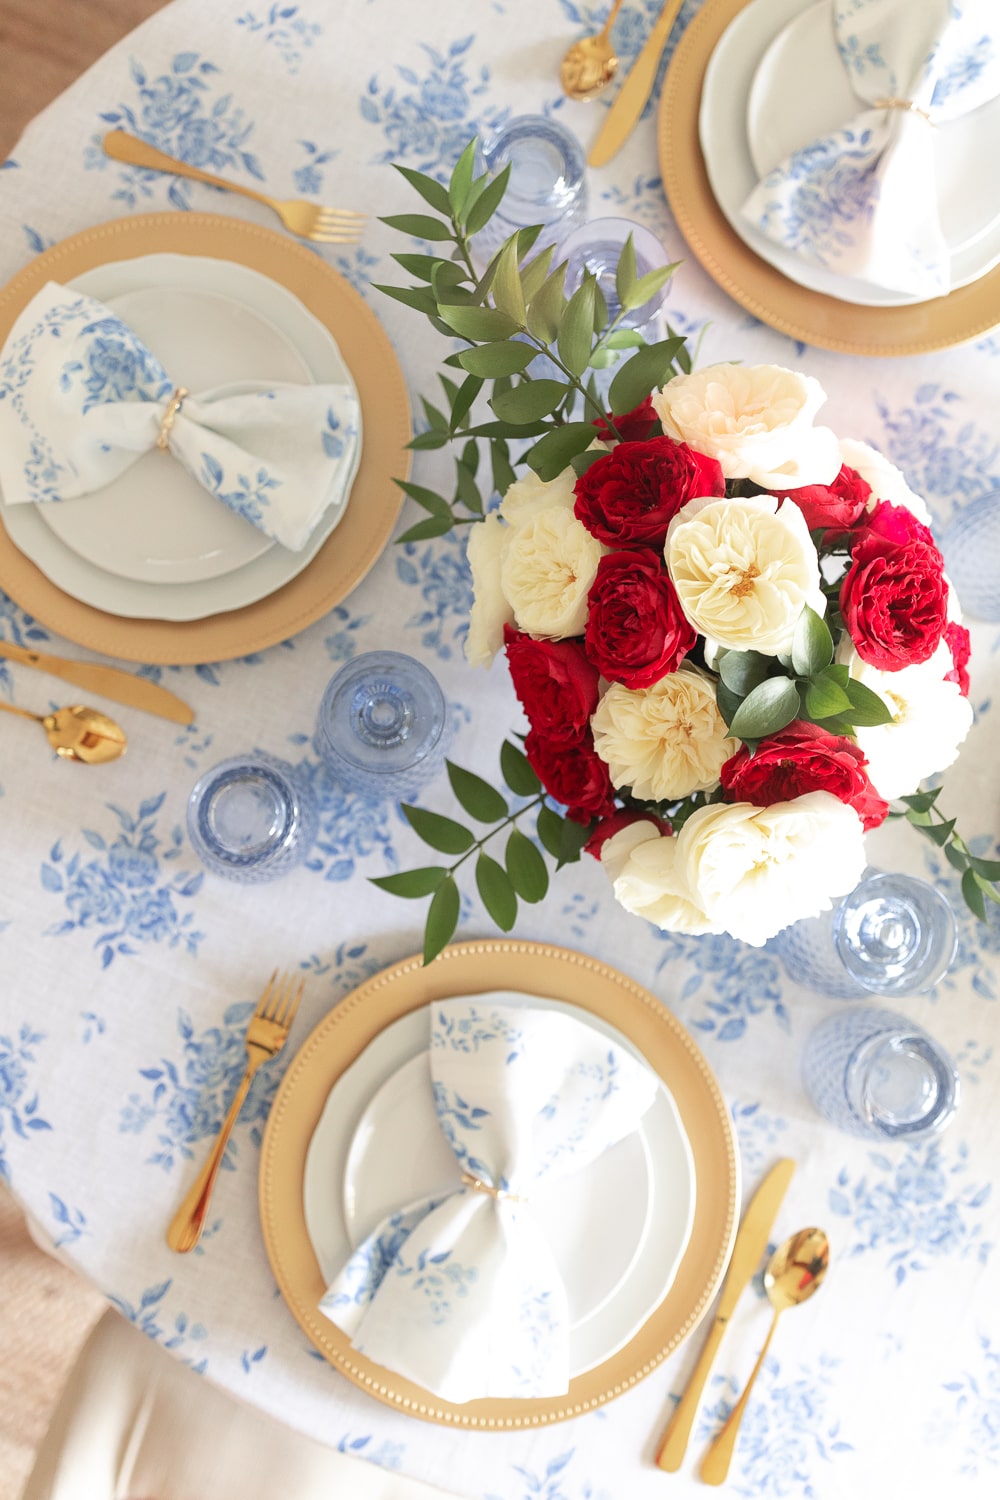 4th of July tablescape designed by blogger Stephanie Ziajka on Diary of a Debutante